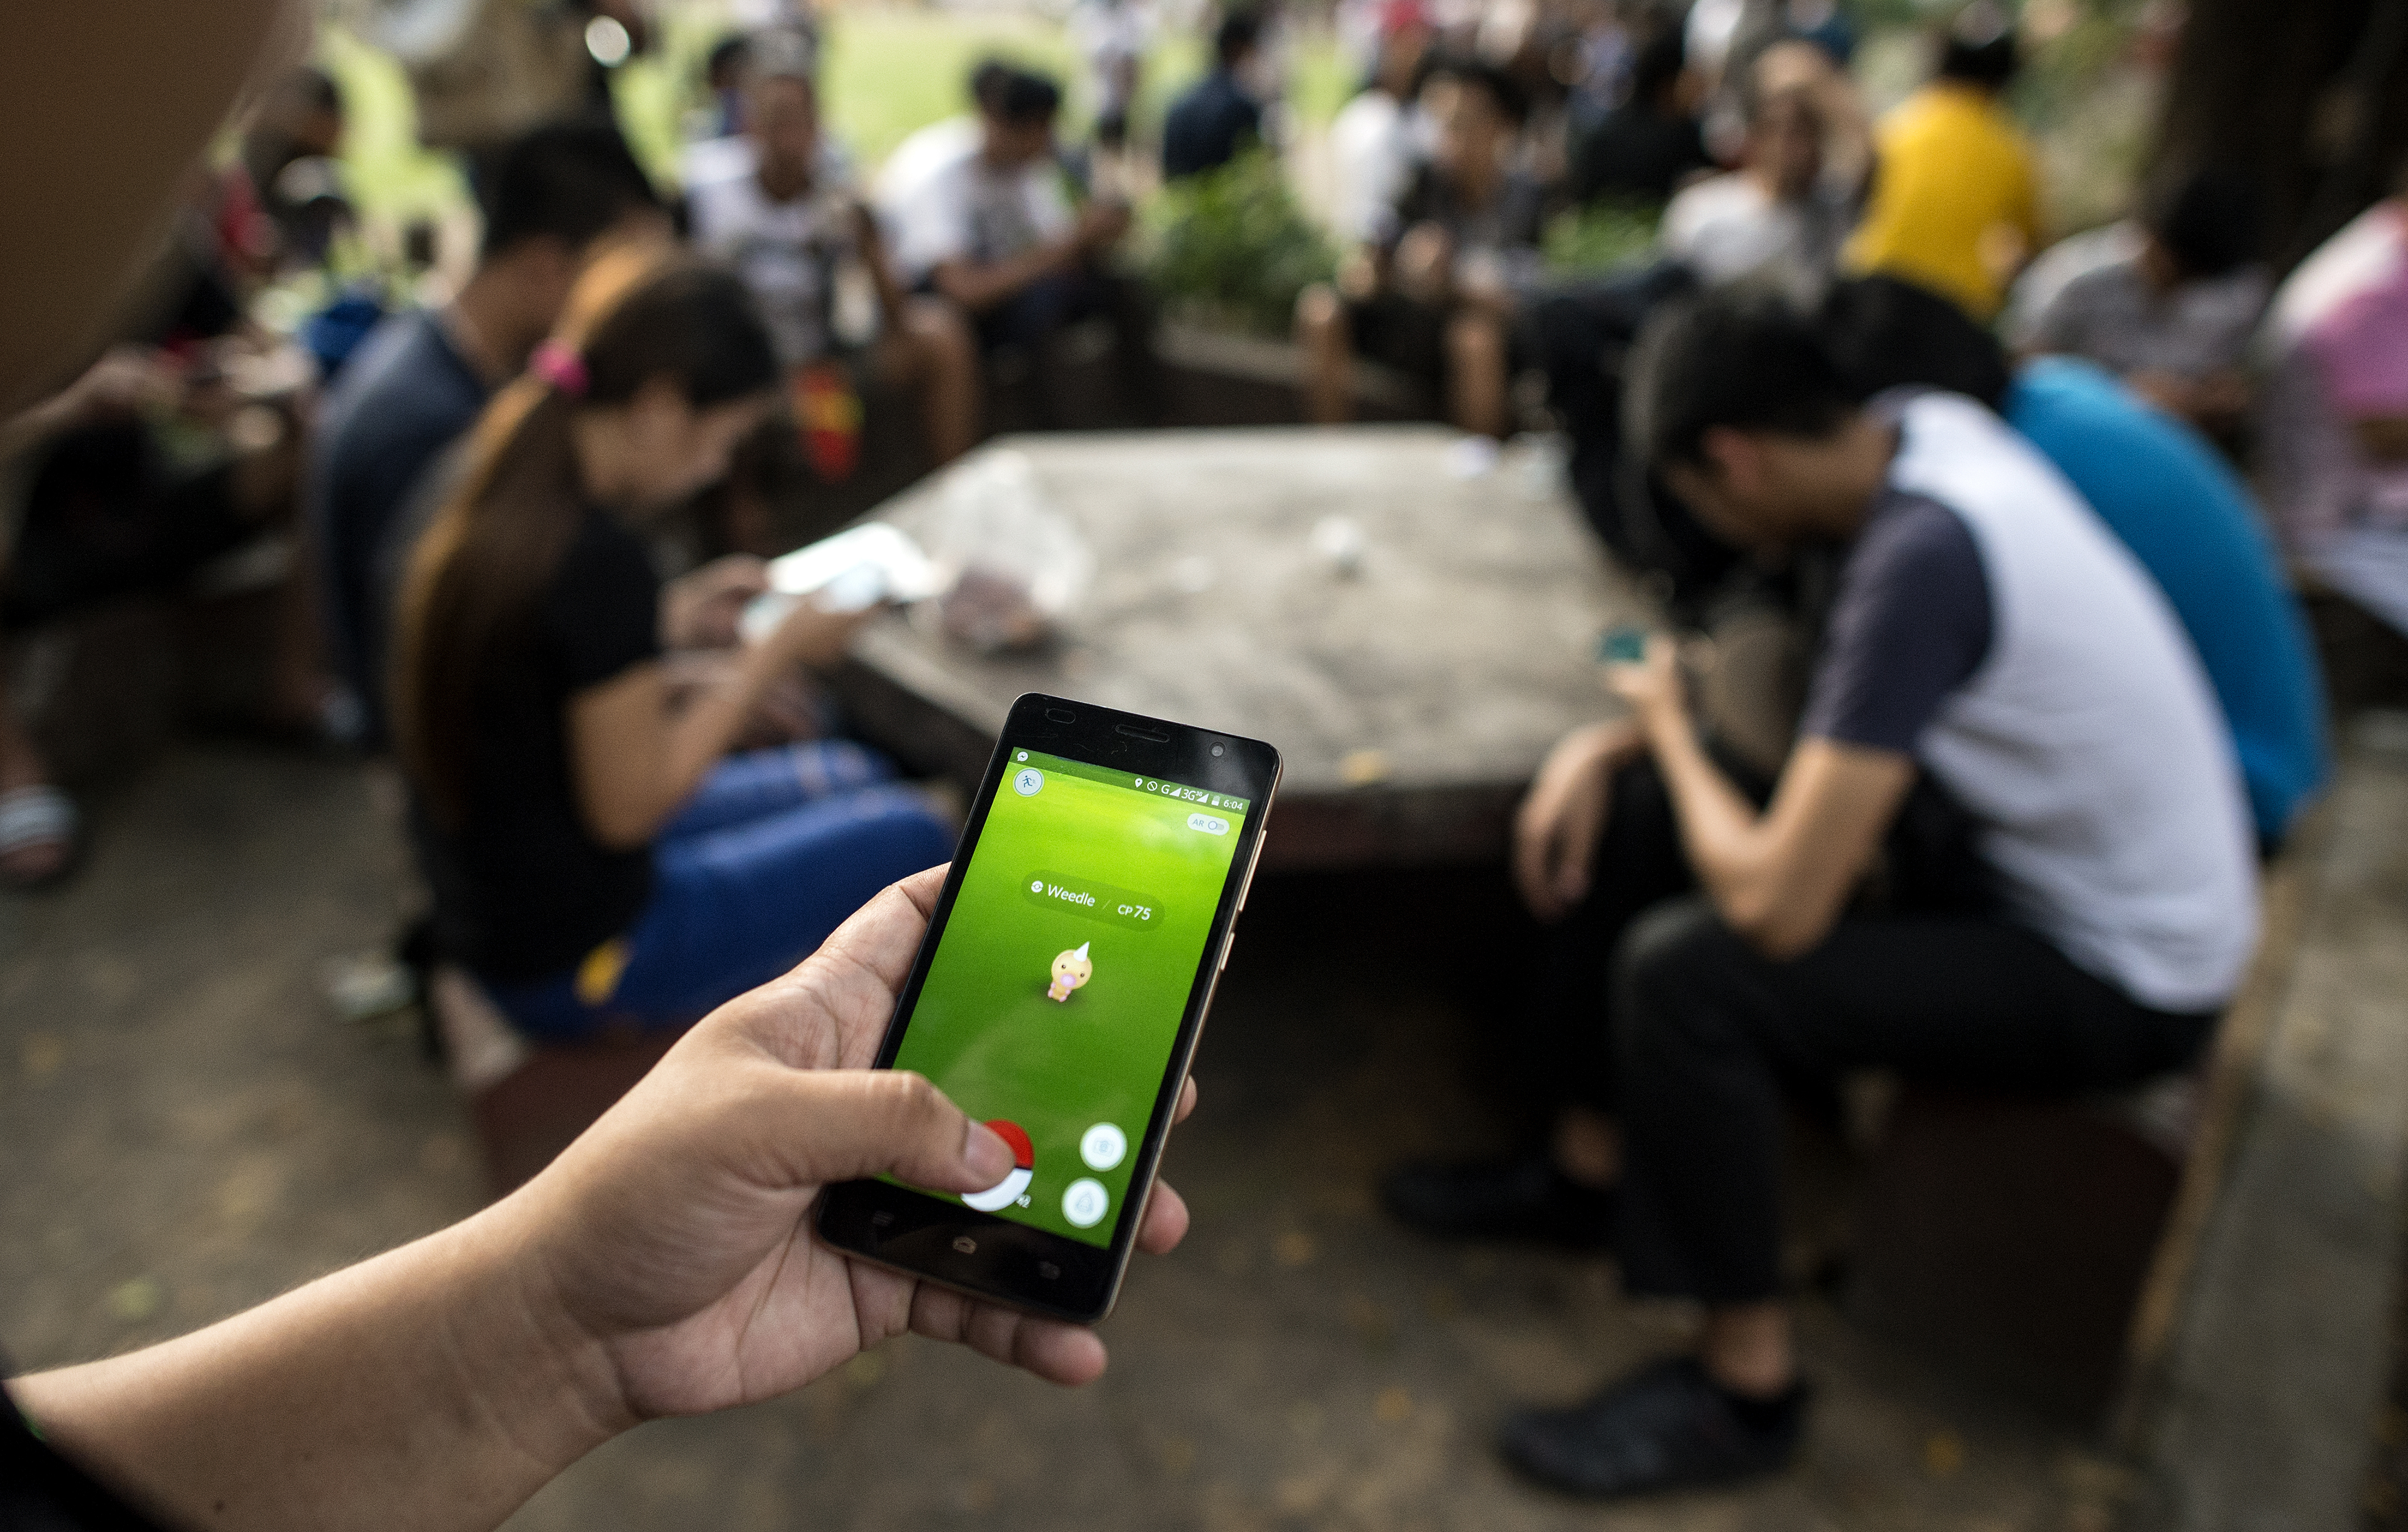 FILE PHOTO: Gamers play Pokemon Go at the Quezon City Memorial Circle in Manila on August 23, 2016. A Philippine city councillor has sought to stop Pokemon Go players in government from losing "productivity" by filing a resolution to ban the hunt for digital monsters in state offices. / AFP PHOTO / NOEL CELIS